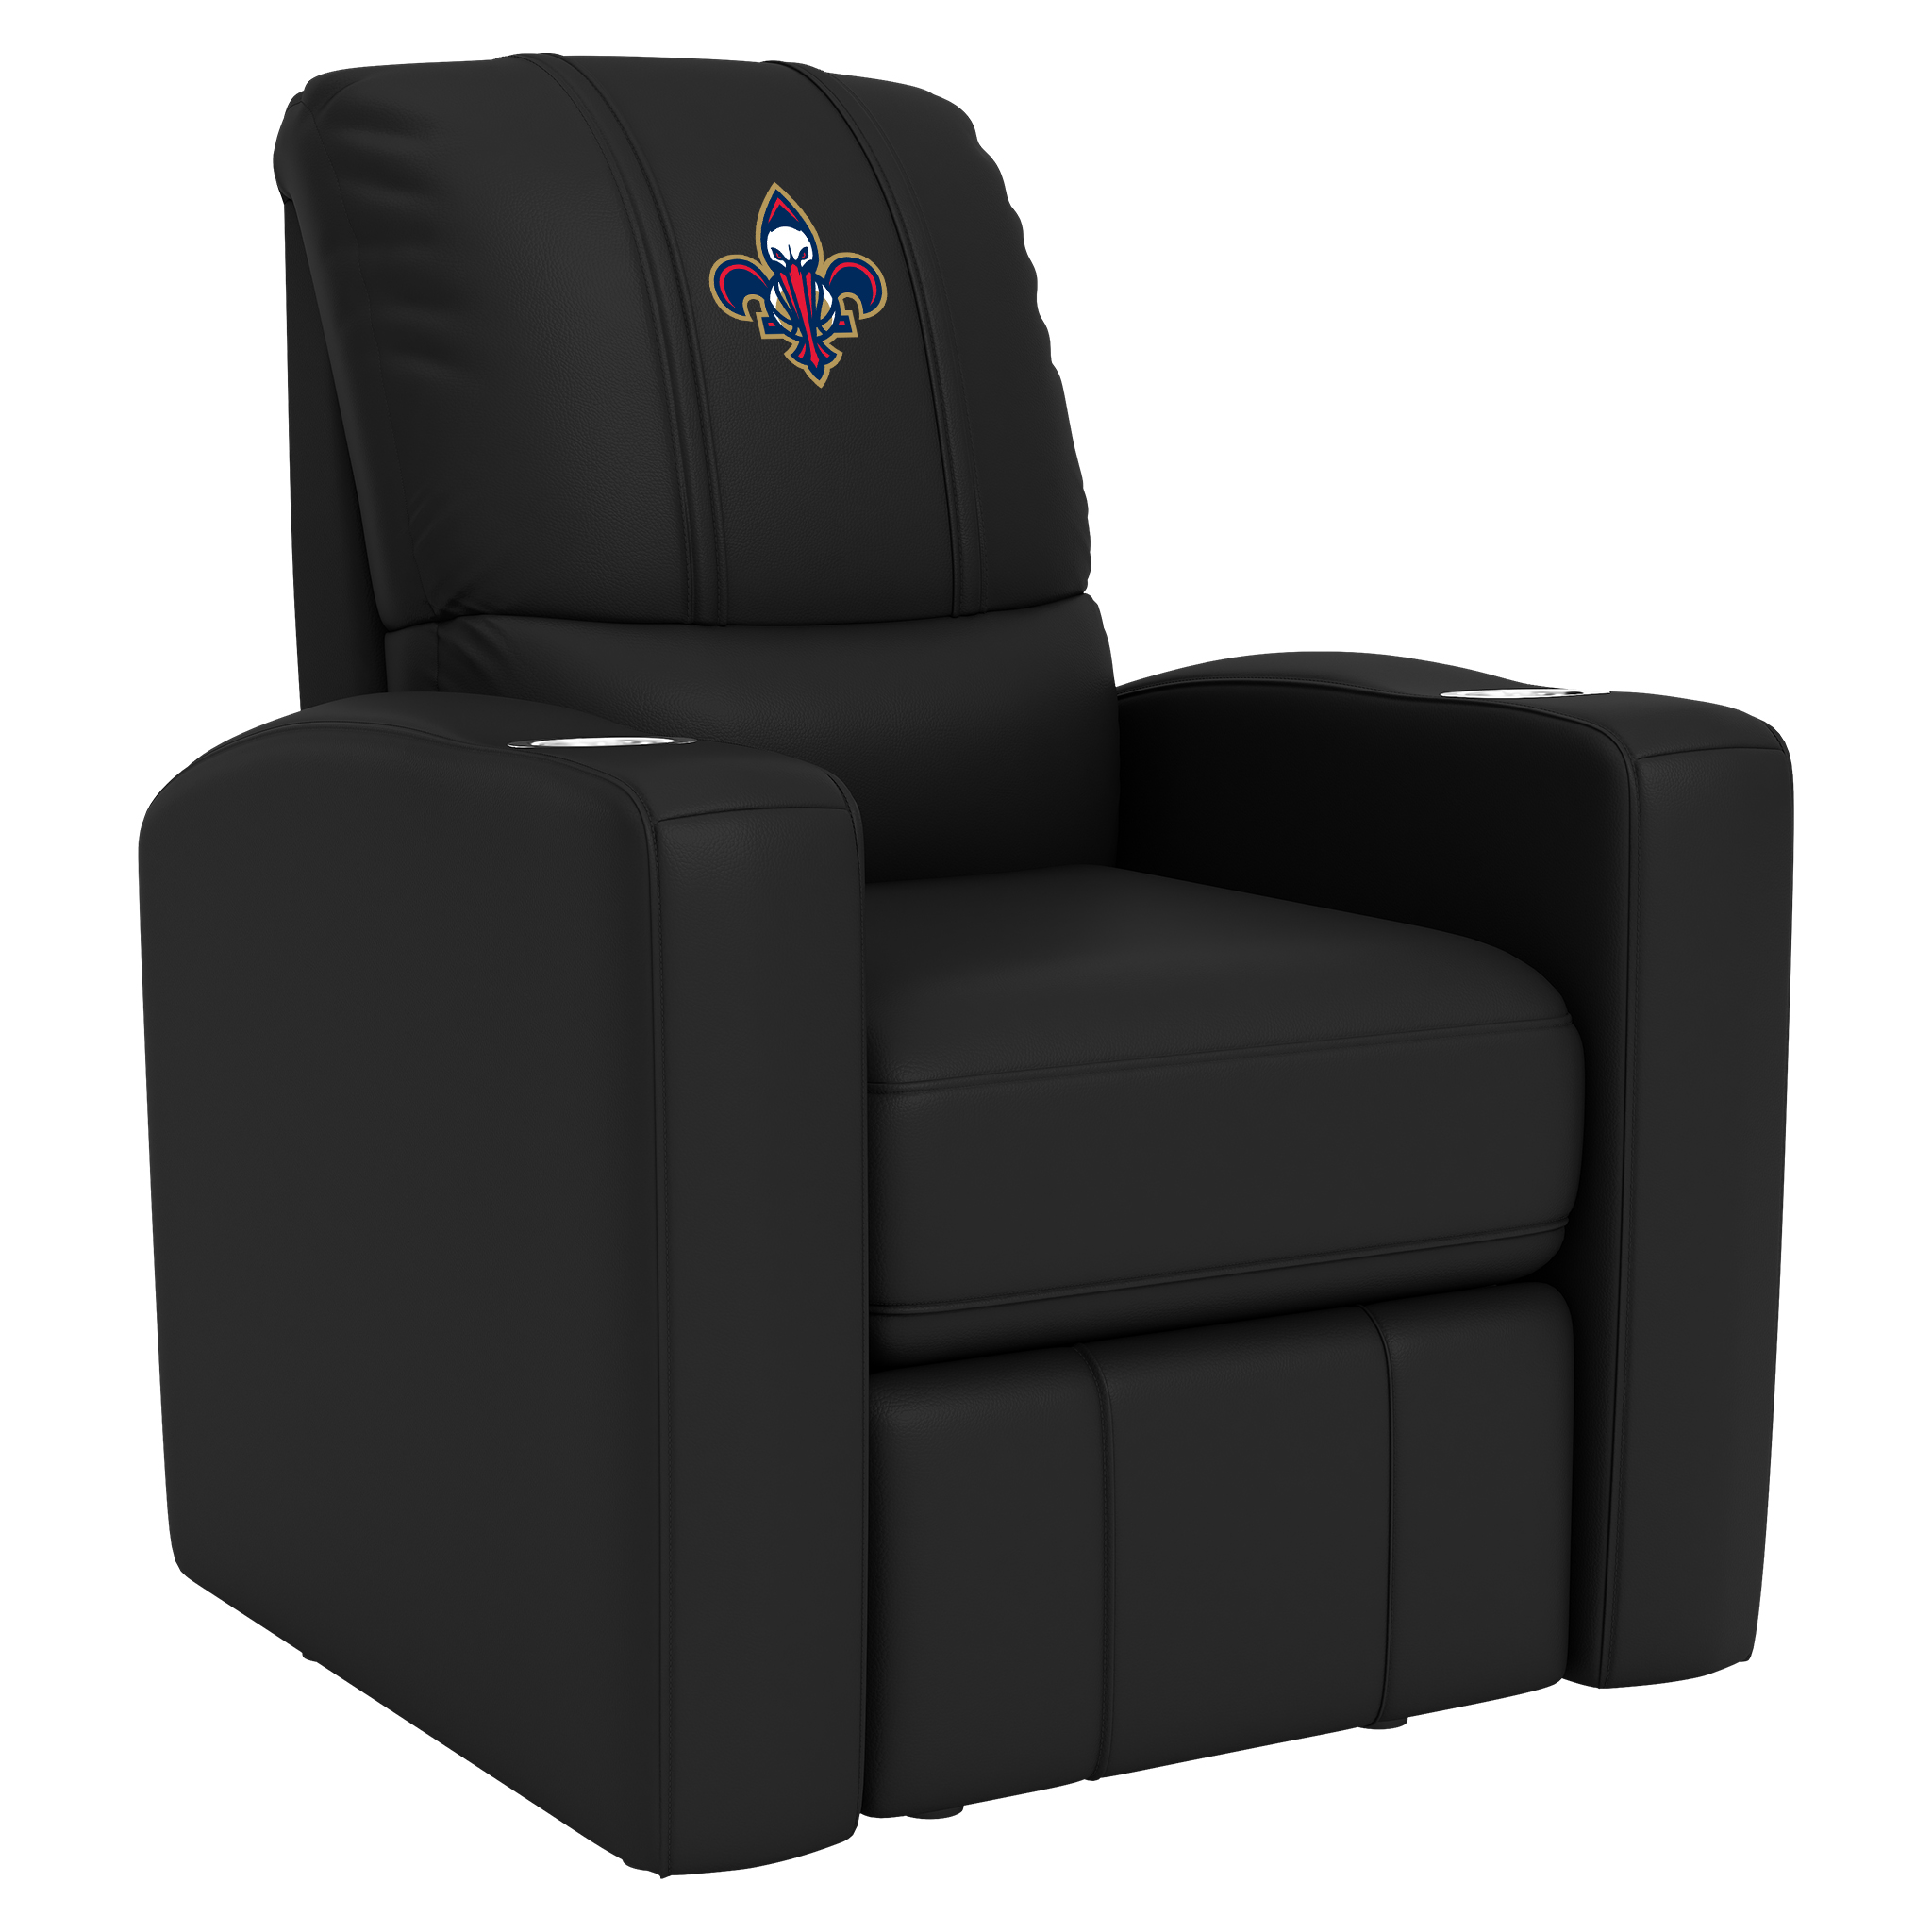 New Orleans Pelicans Stealth Recliner with New Orleans Pelicans Secondary